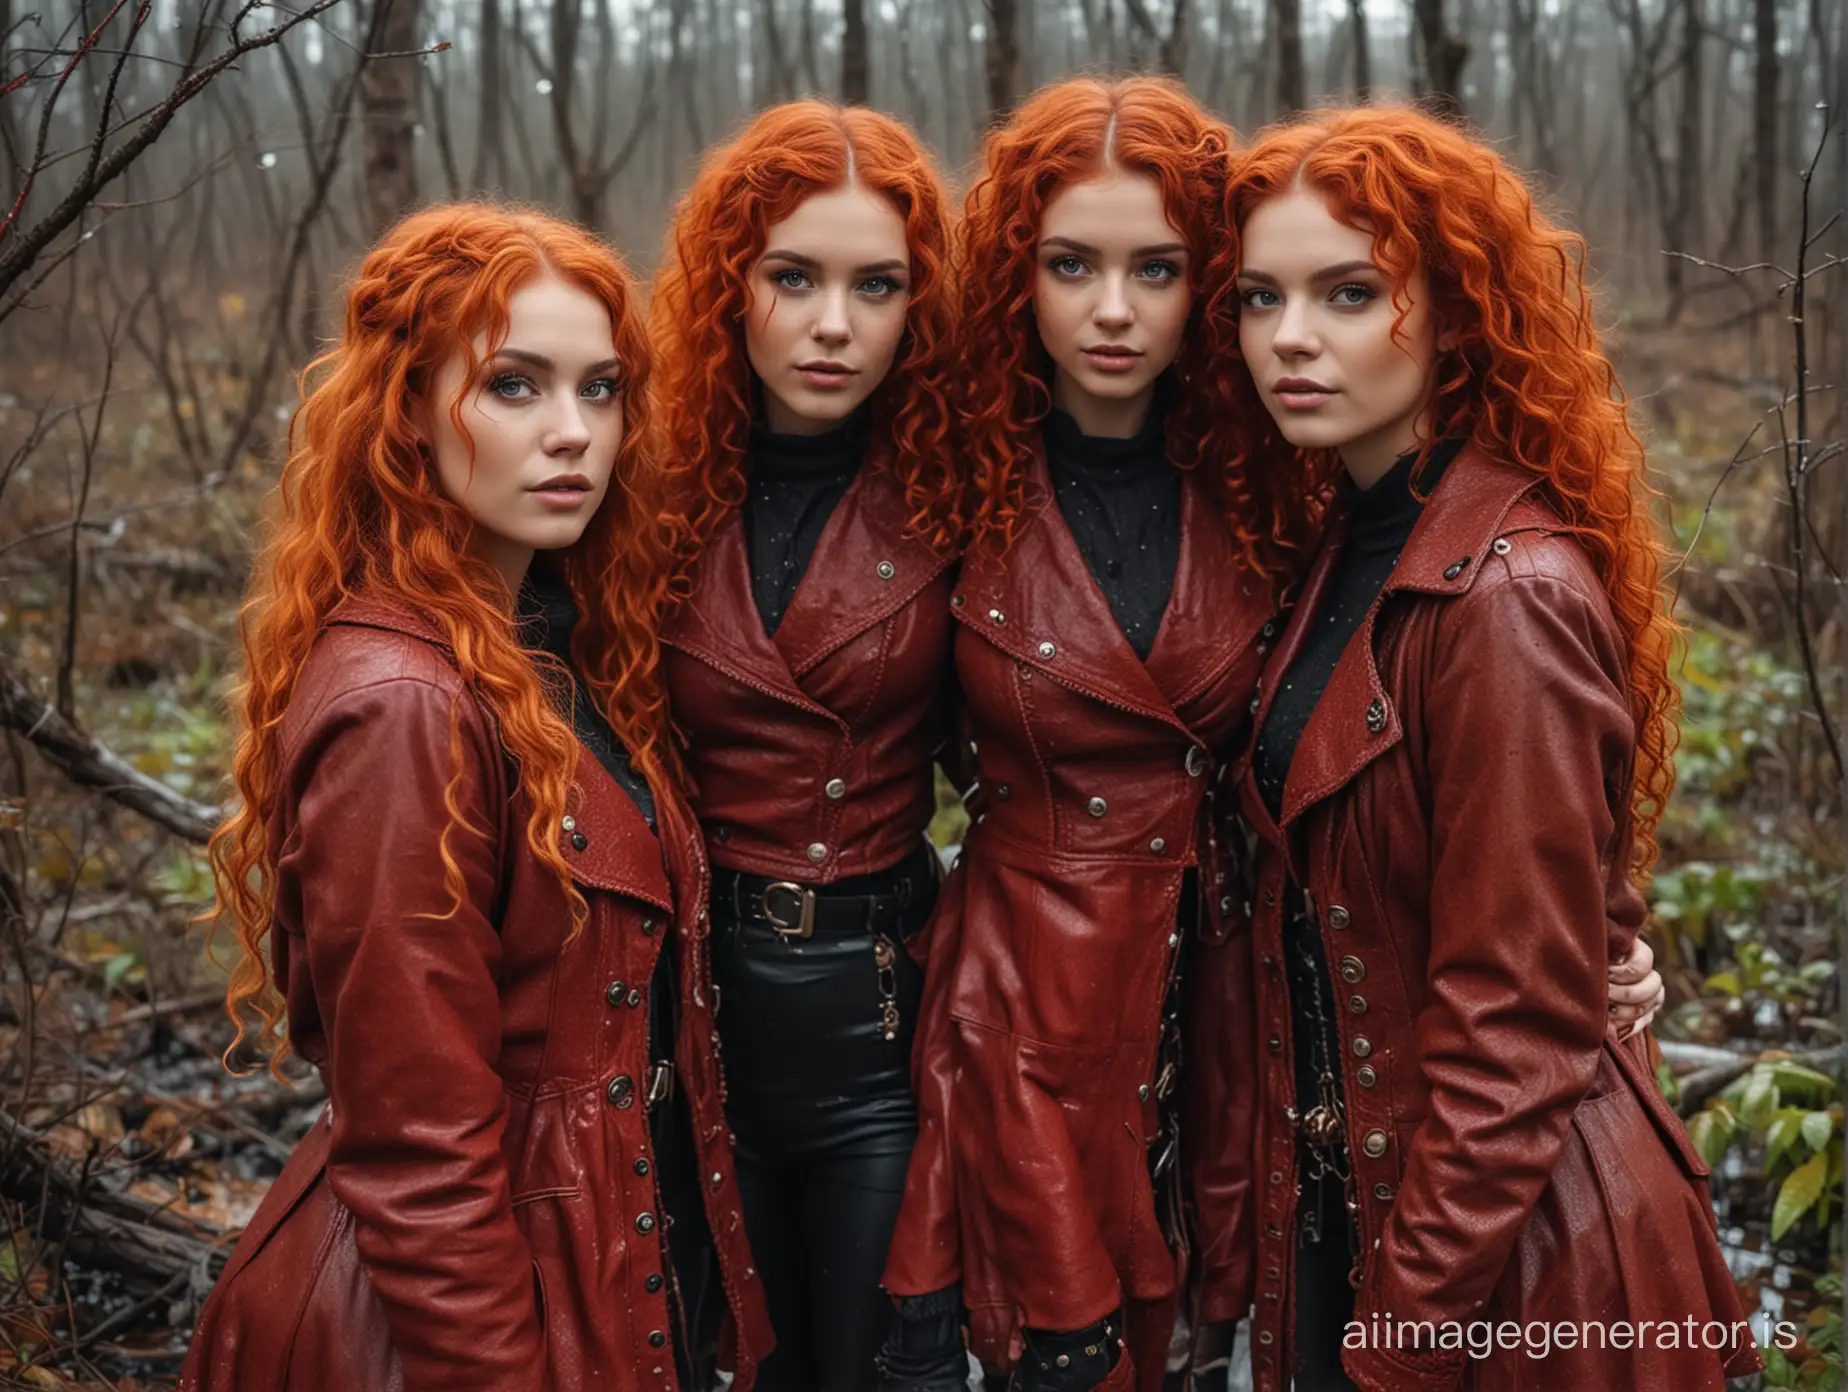 waist-deep in a swamp wet curly fiery-haired appears like a messy scribble three steampunk cute happy girls in red leather clothes under him openwork sweater hugs a girl in knitted clothes. beauty makeup eyes, tights. night, rain. moss, fallen leaves and broken branches, fern